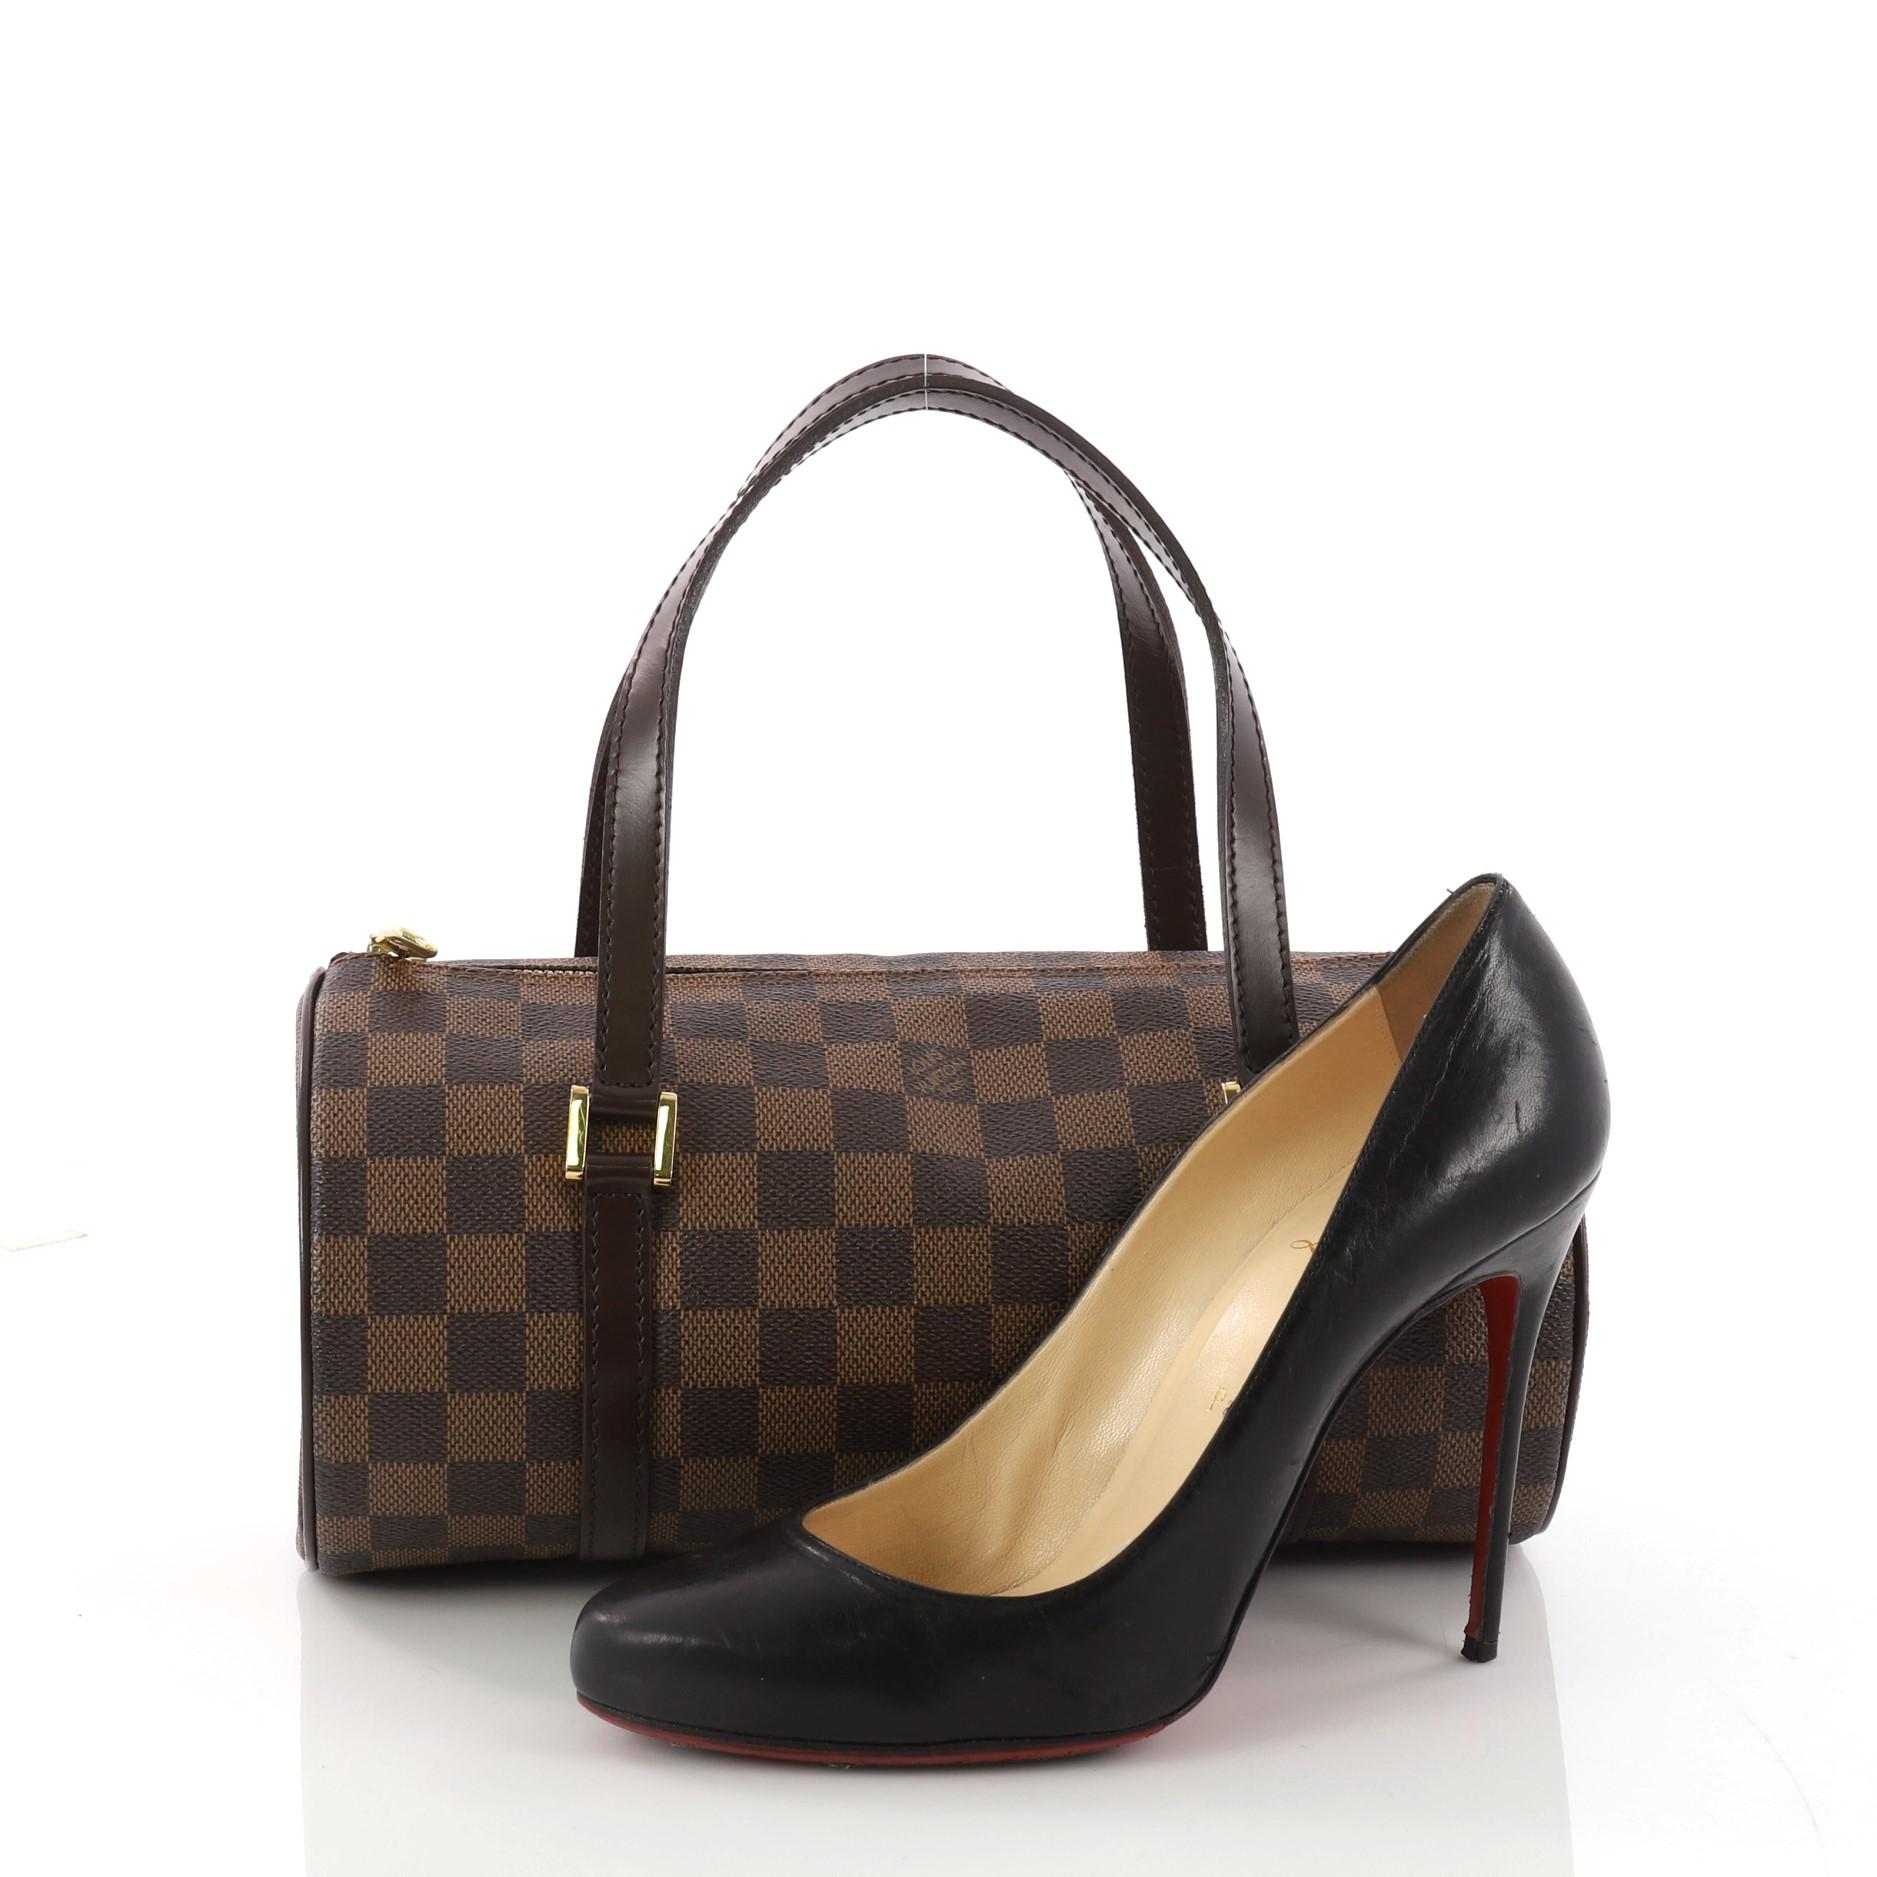 This authentic Louis Vuitton Papillon Handbag Damier 26 is one of Louis Vuitton's iconic bags with its unique round shape that complements both dressy and casual looks. Crafted with damier ebene coated canvas, this practical handle bag features dark